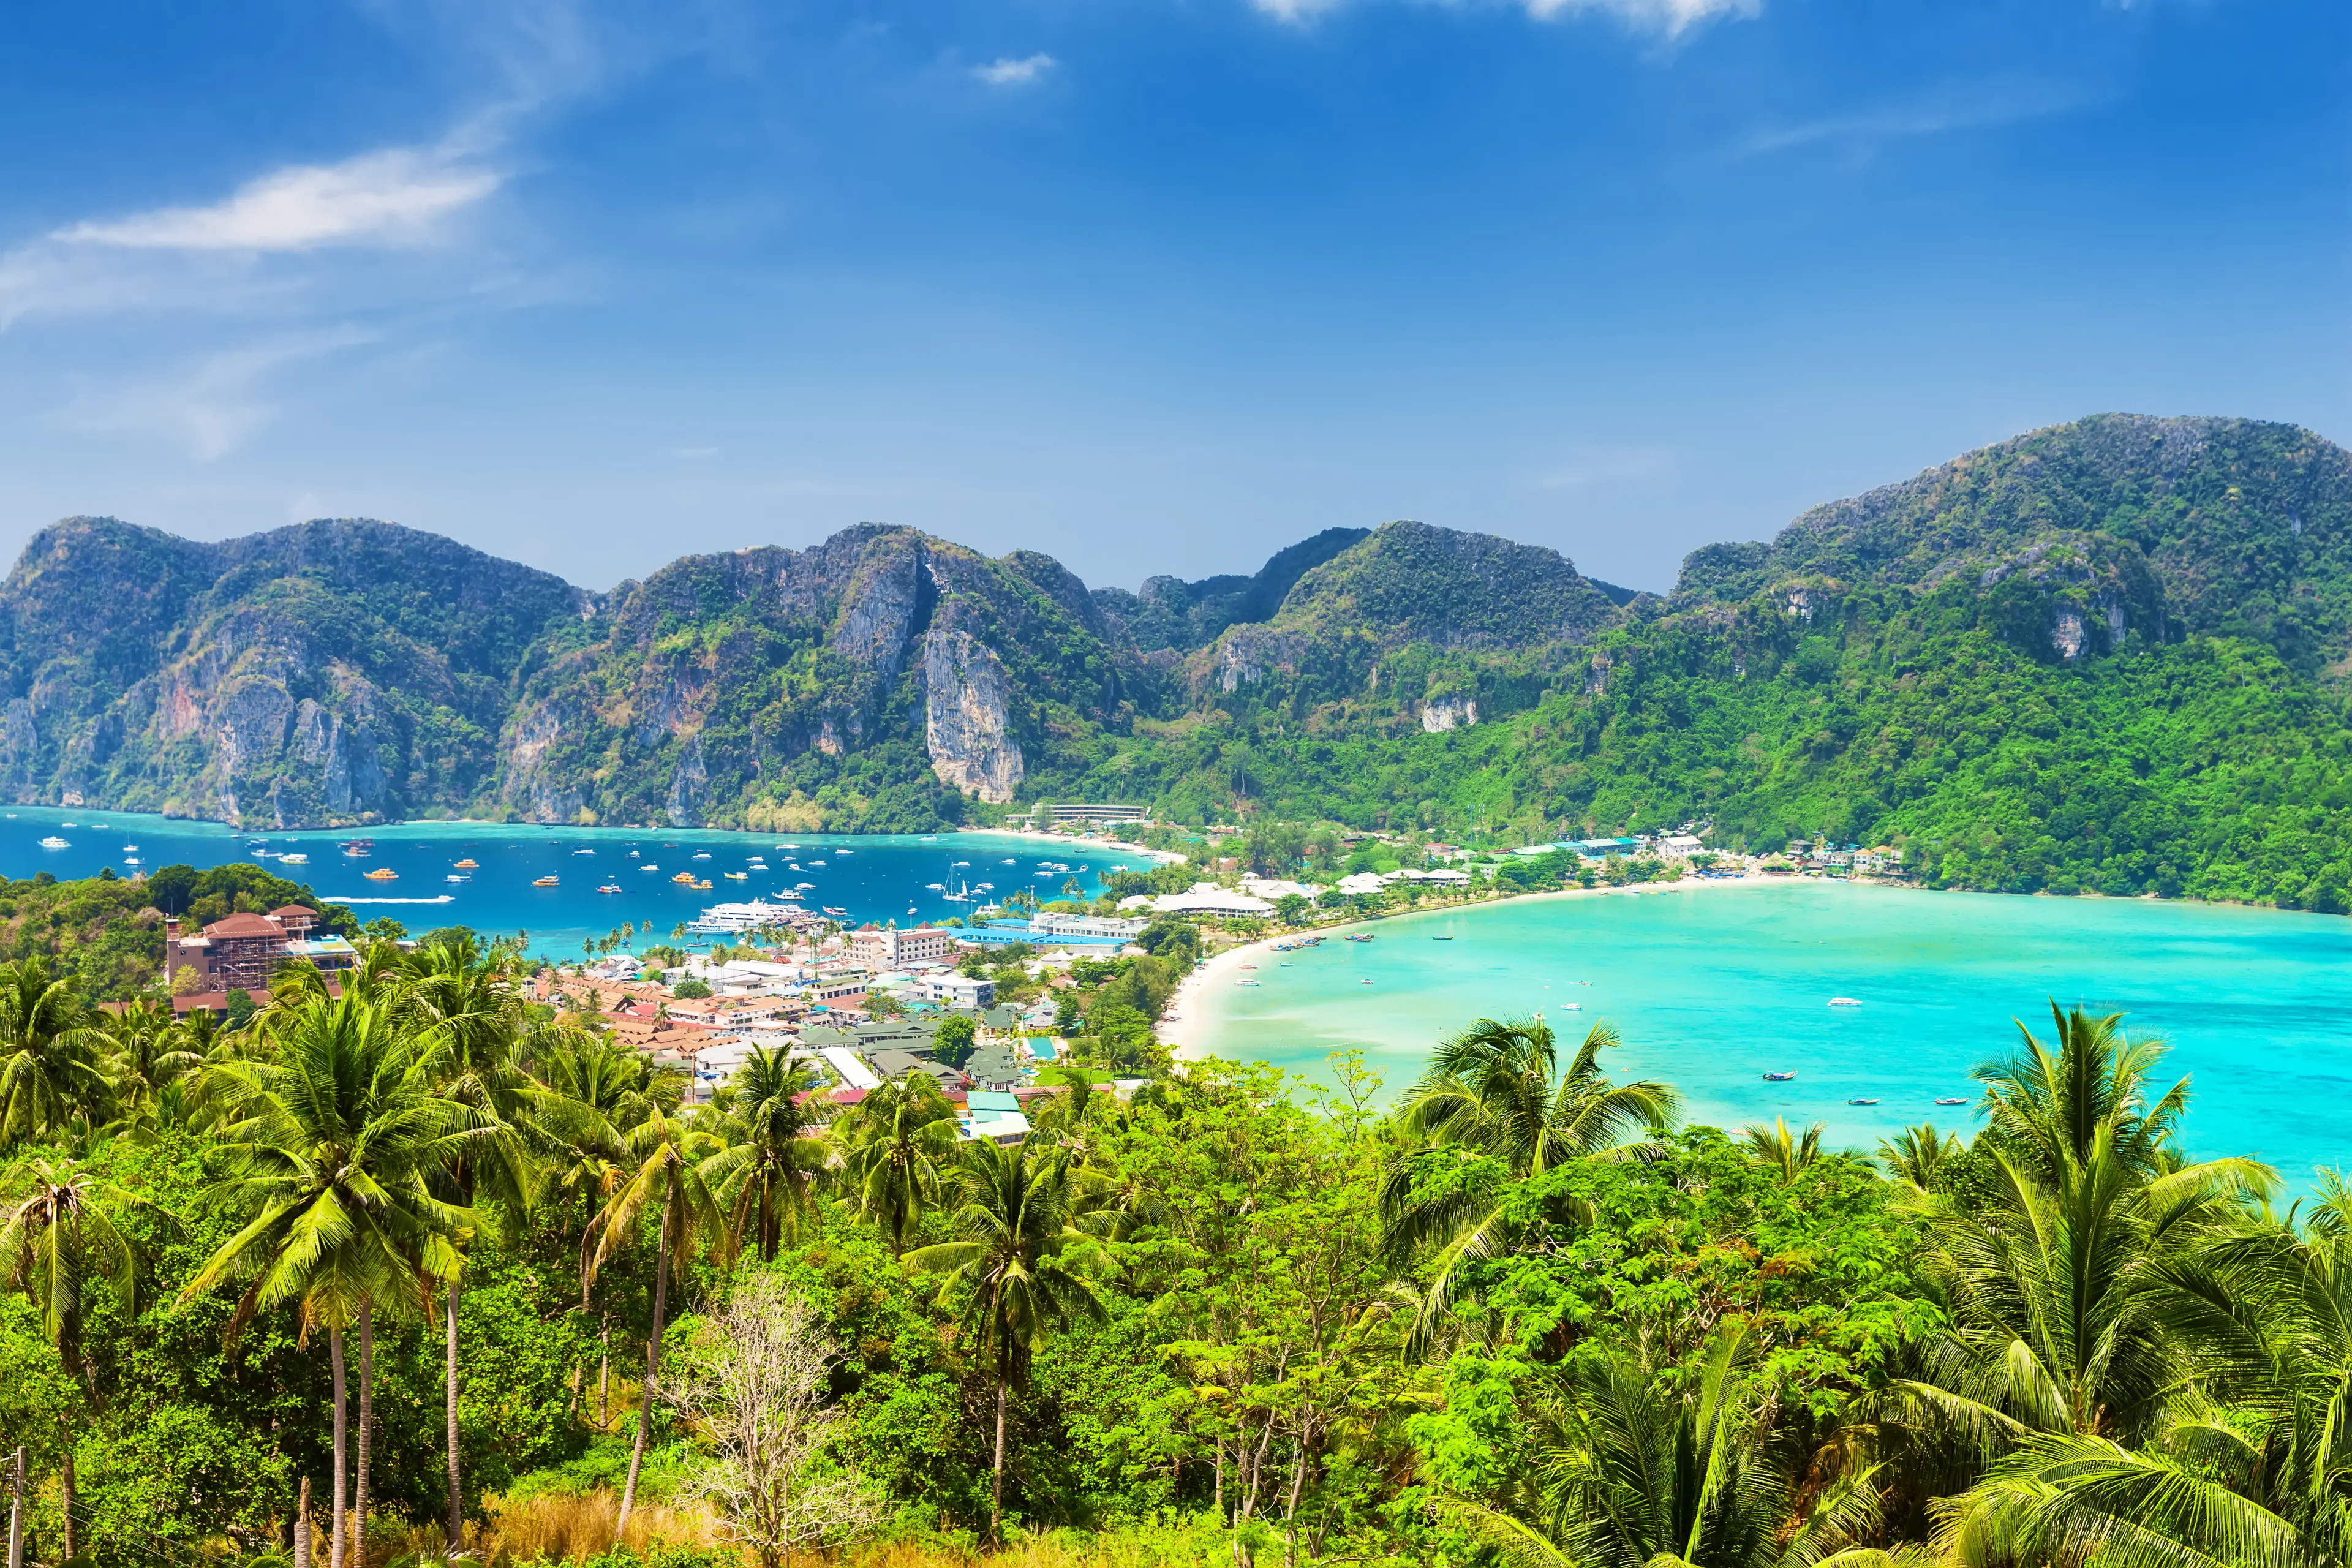 Solo 3-Day Adventure & Relaxation Itinerary for Phi Phi Islands